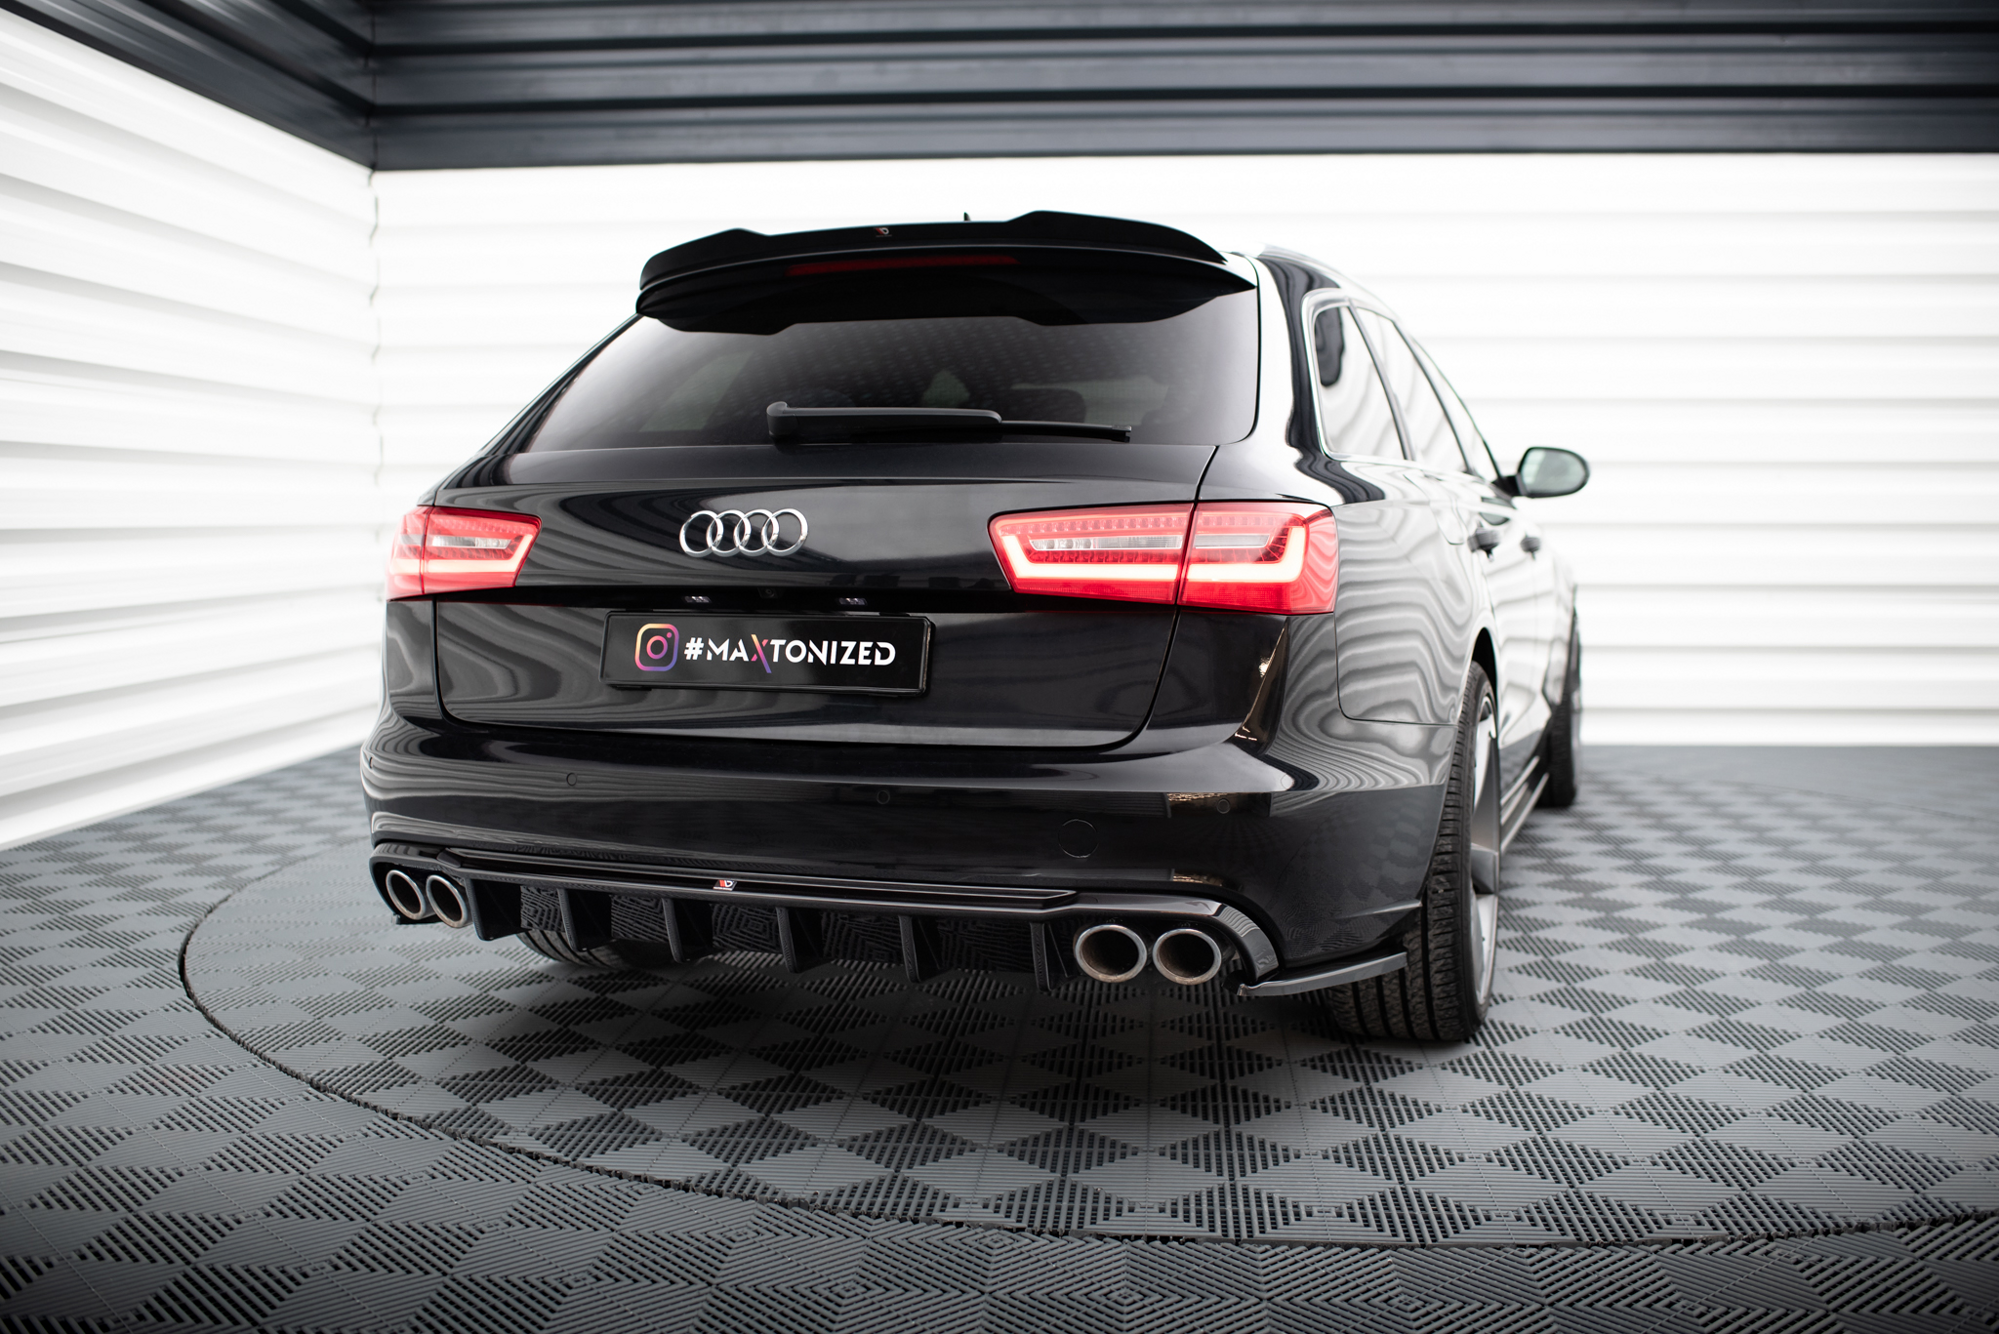 Rear Valance Audi A6 Avant C7 (Version with dual exhausts on both sides)